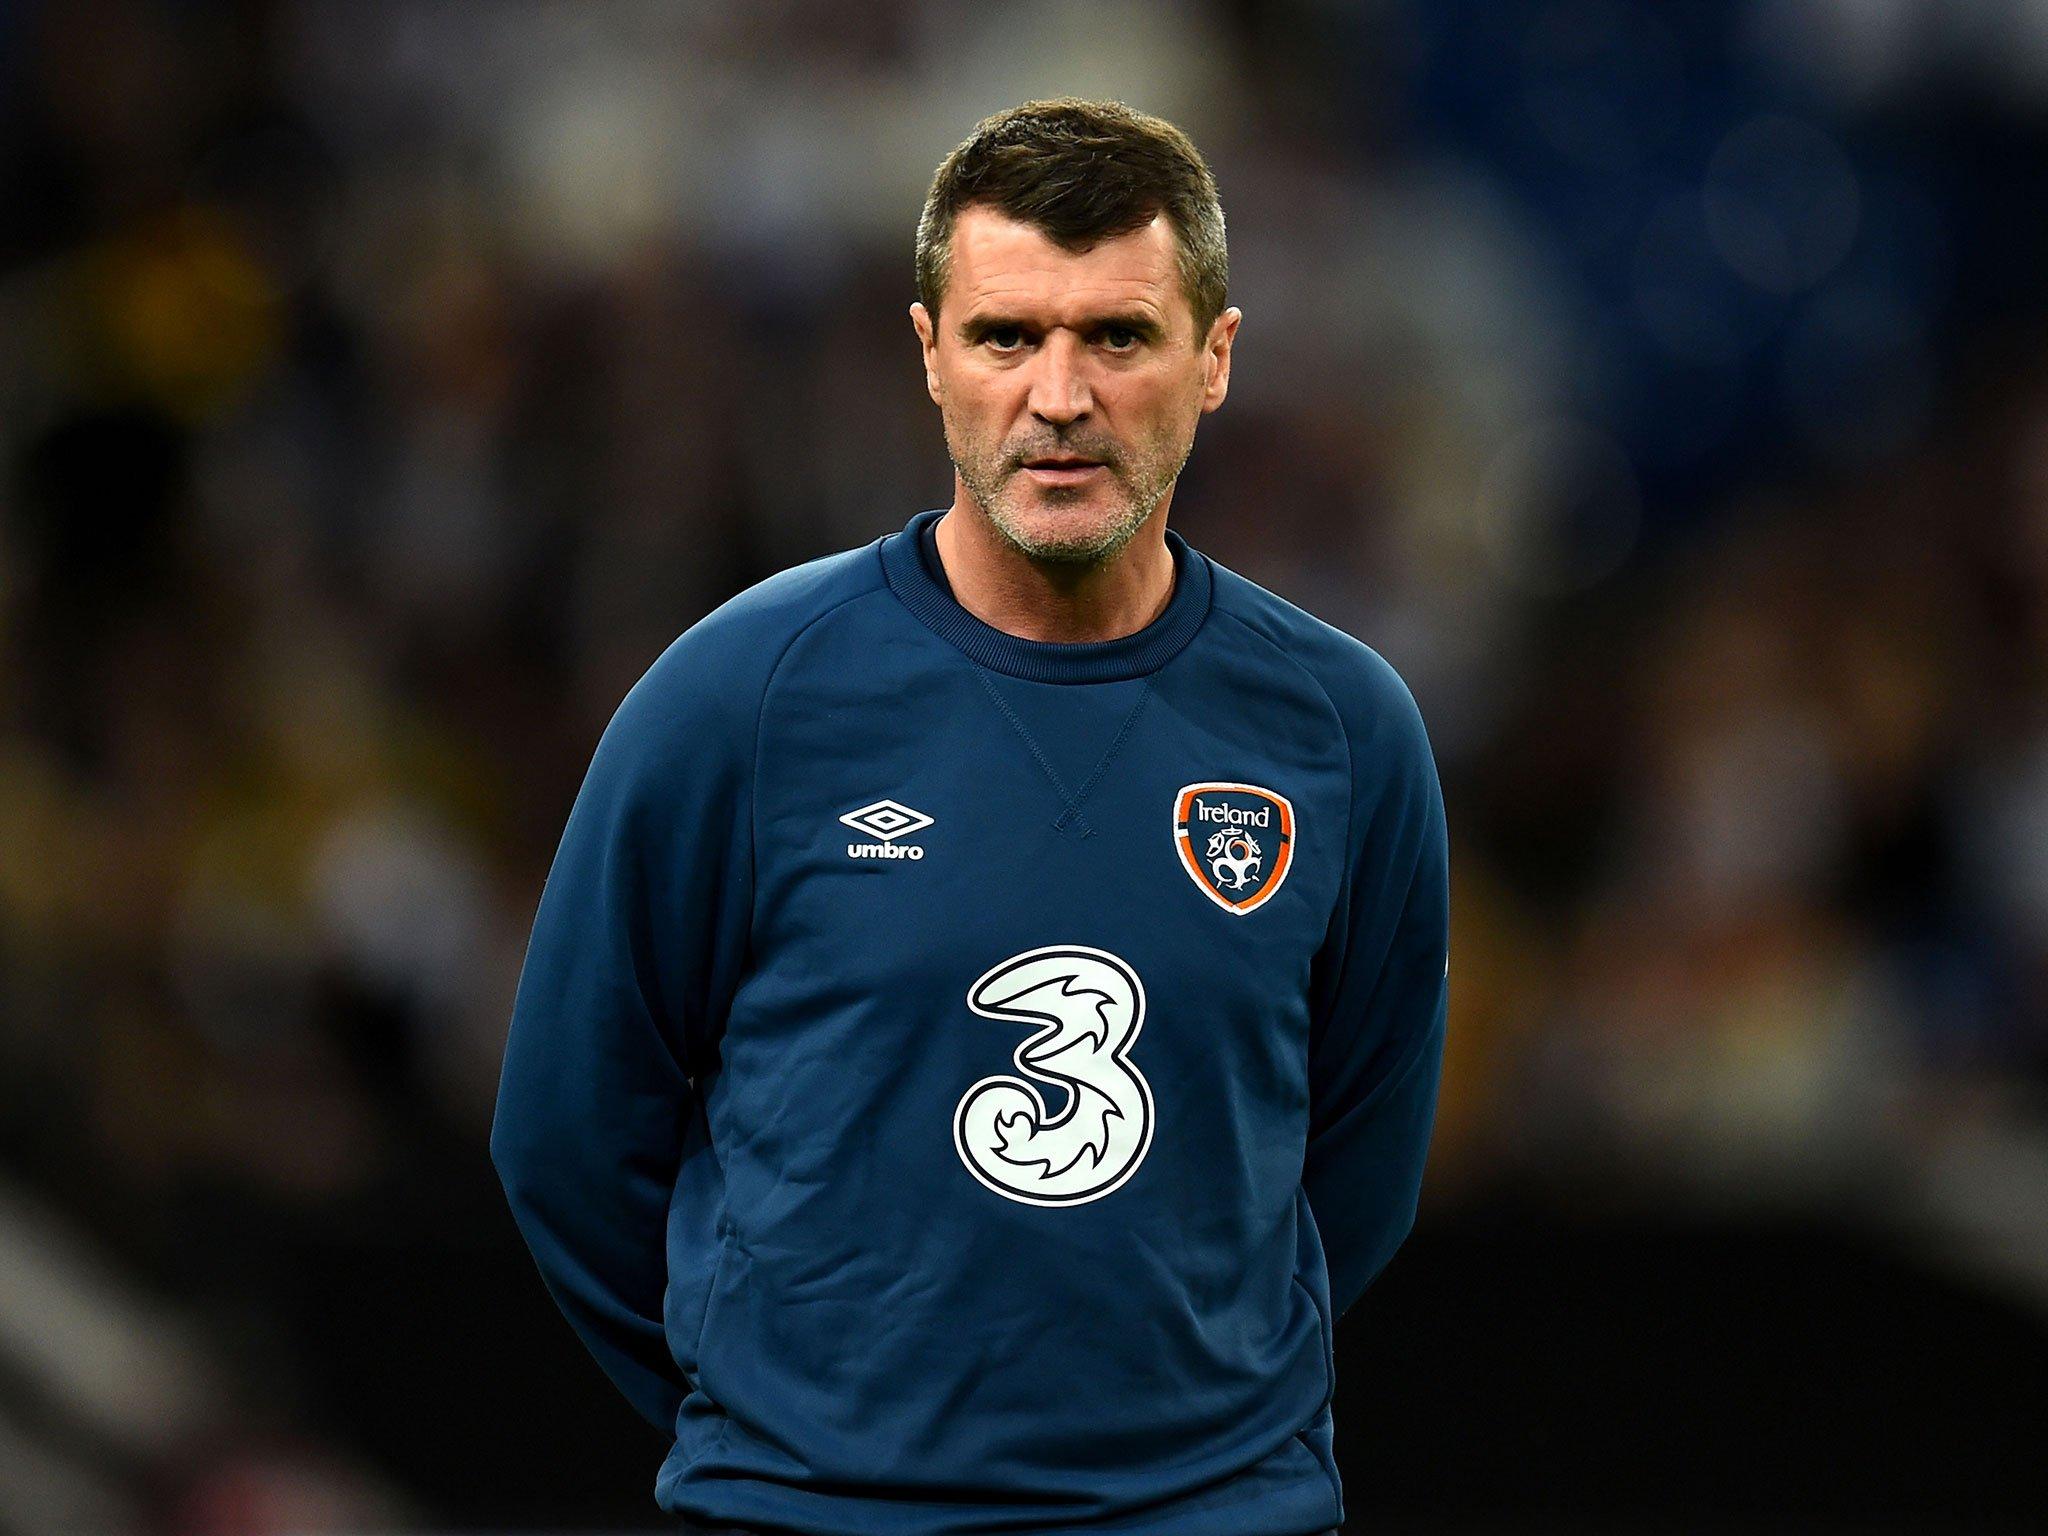 Roy Keane in alleged 'road rage' incident investigating